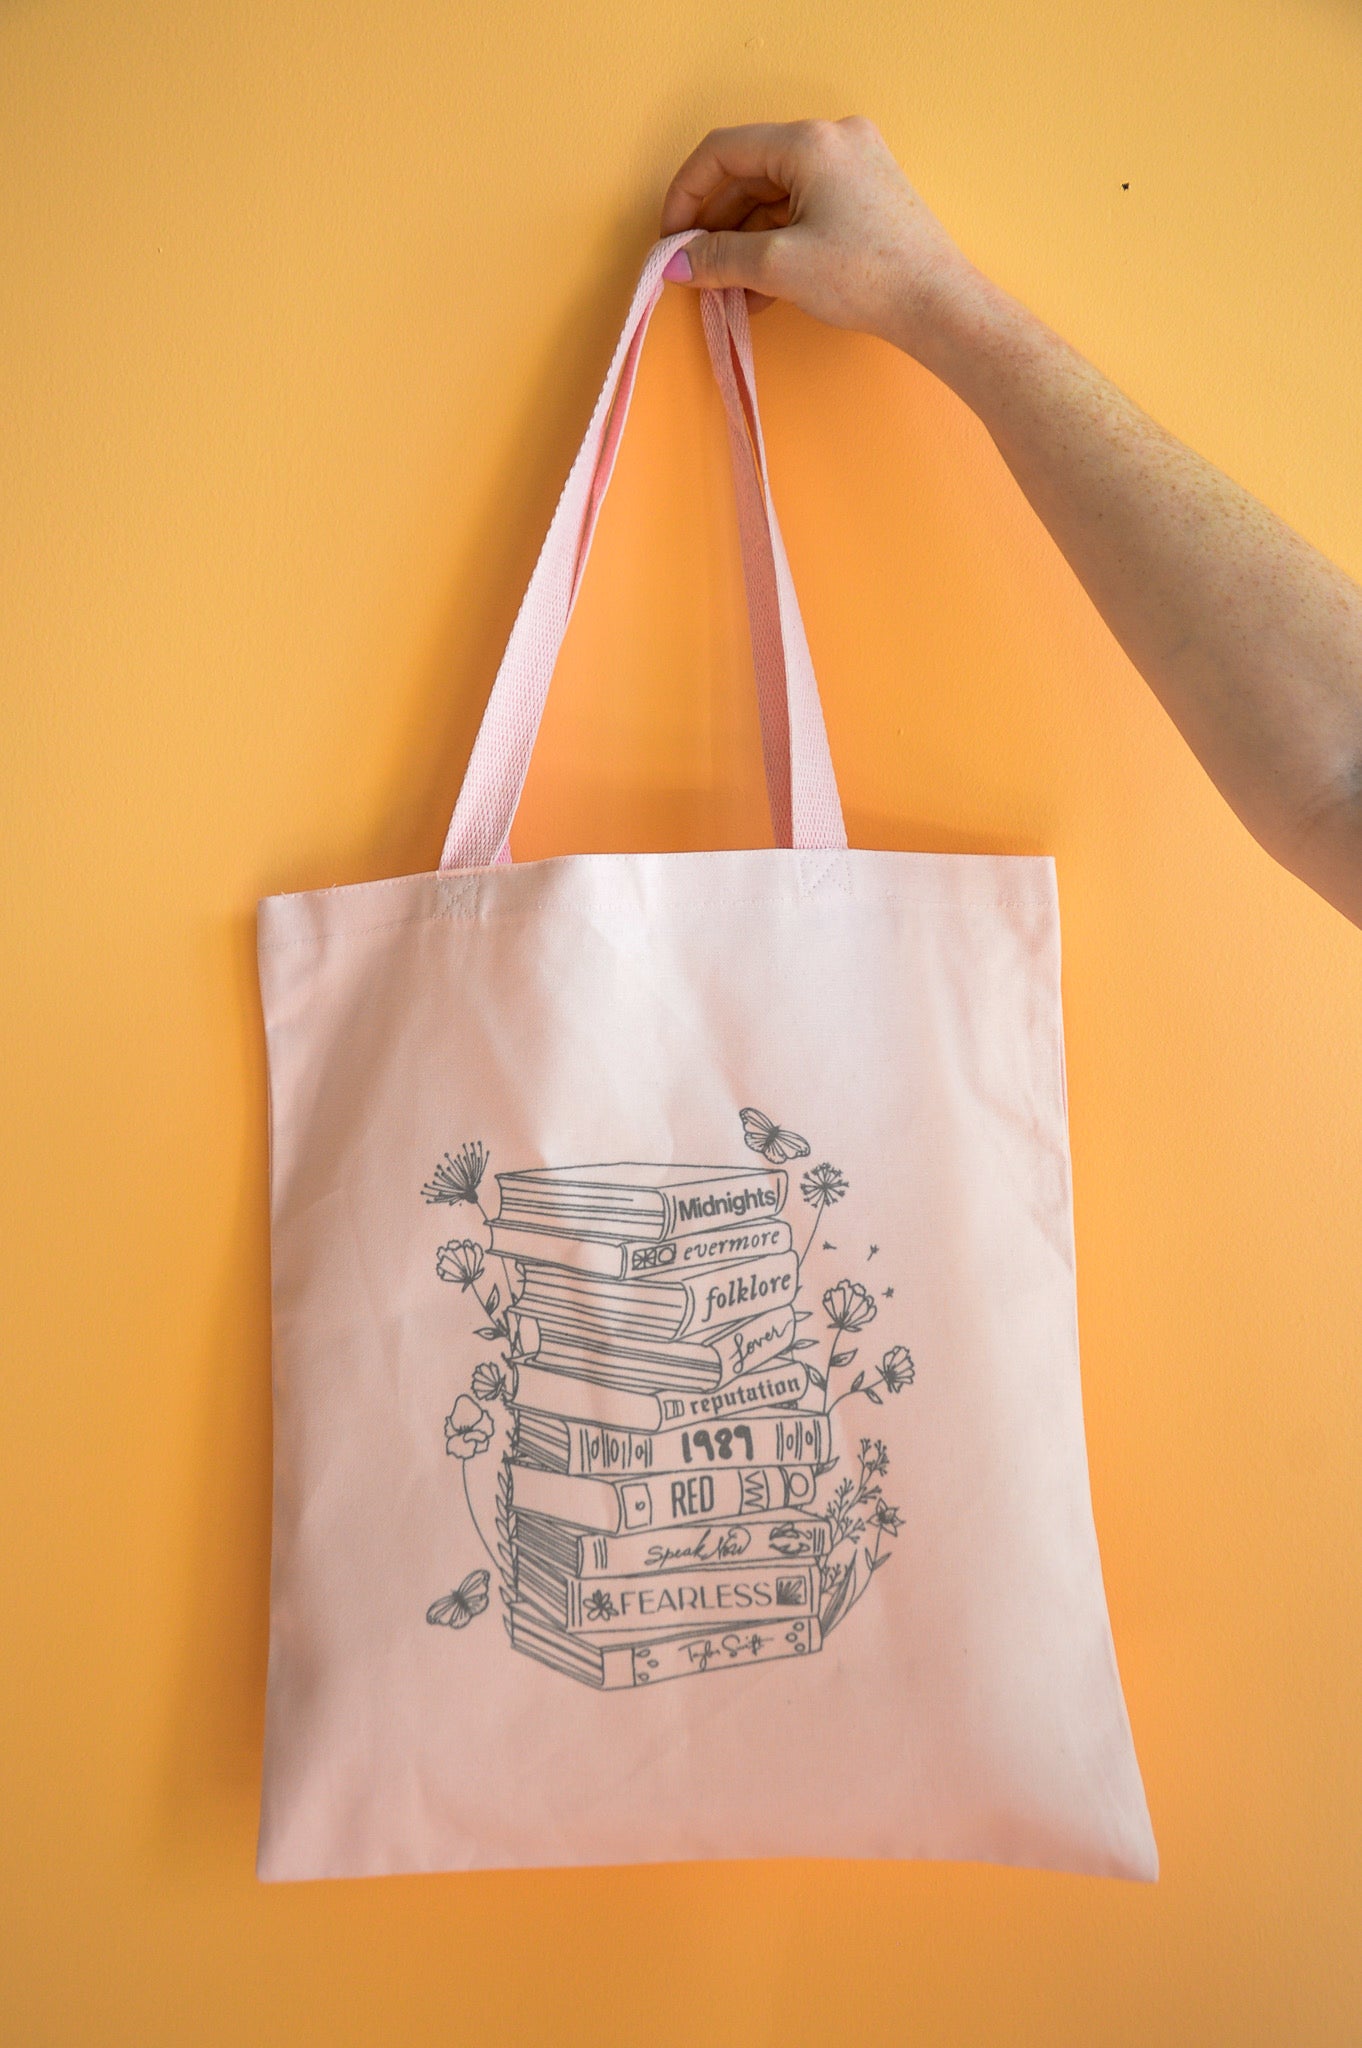 Taylor Swift Albums as Books-Tote Bag - Front Porch Alabama